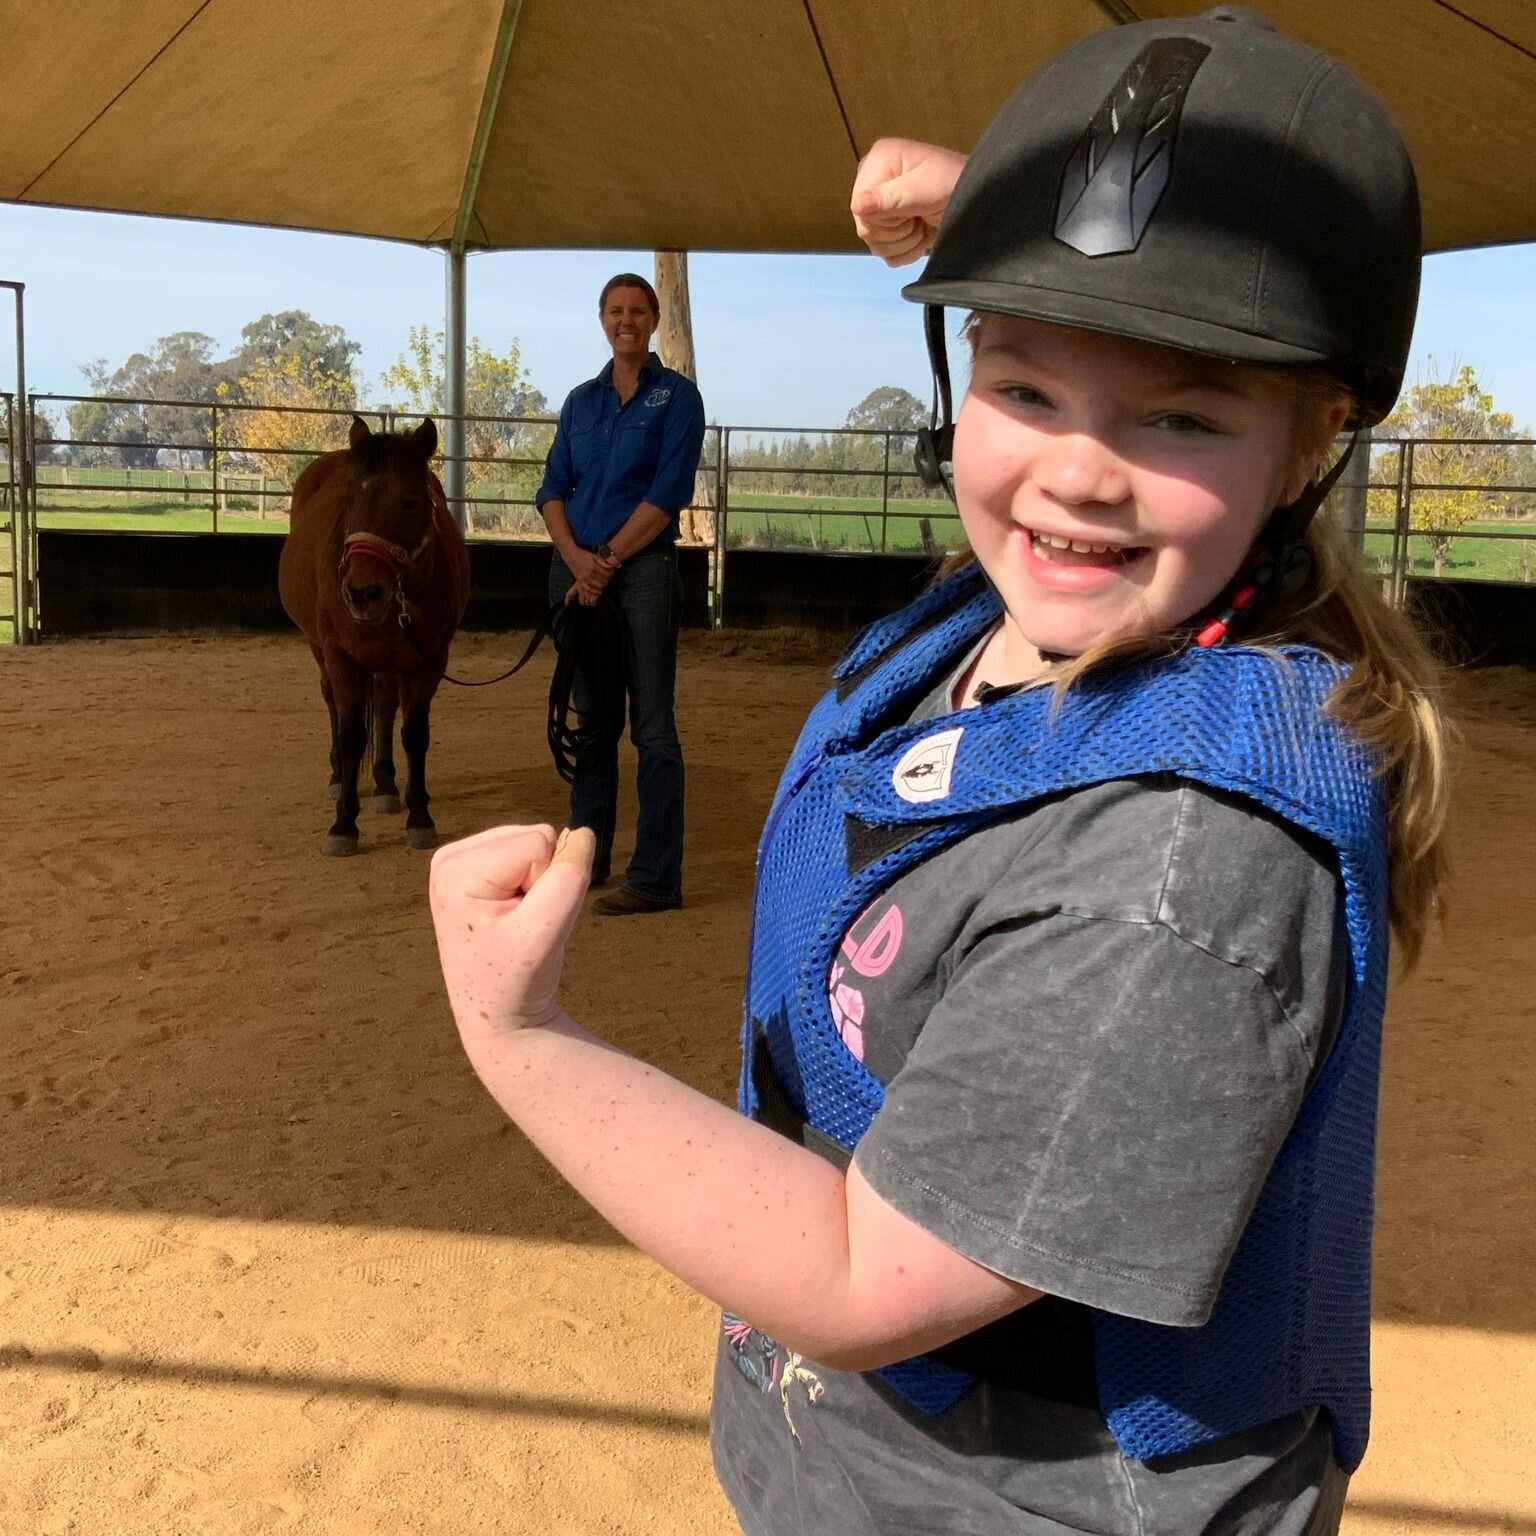 Amongst the seriousness of &lsquo;counselling&rsquo;, we too try to have fun. Every day the horses remind us to do this and today was no exception when Brea decided it would be funny to blow her nose all over this smiling participants arm 😆💙🐴

#ho